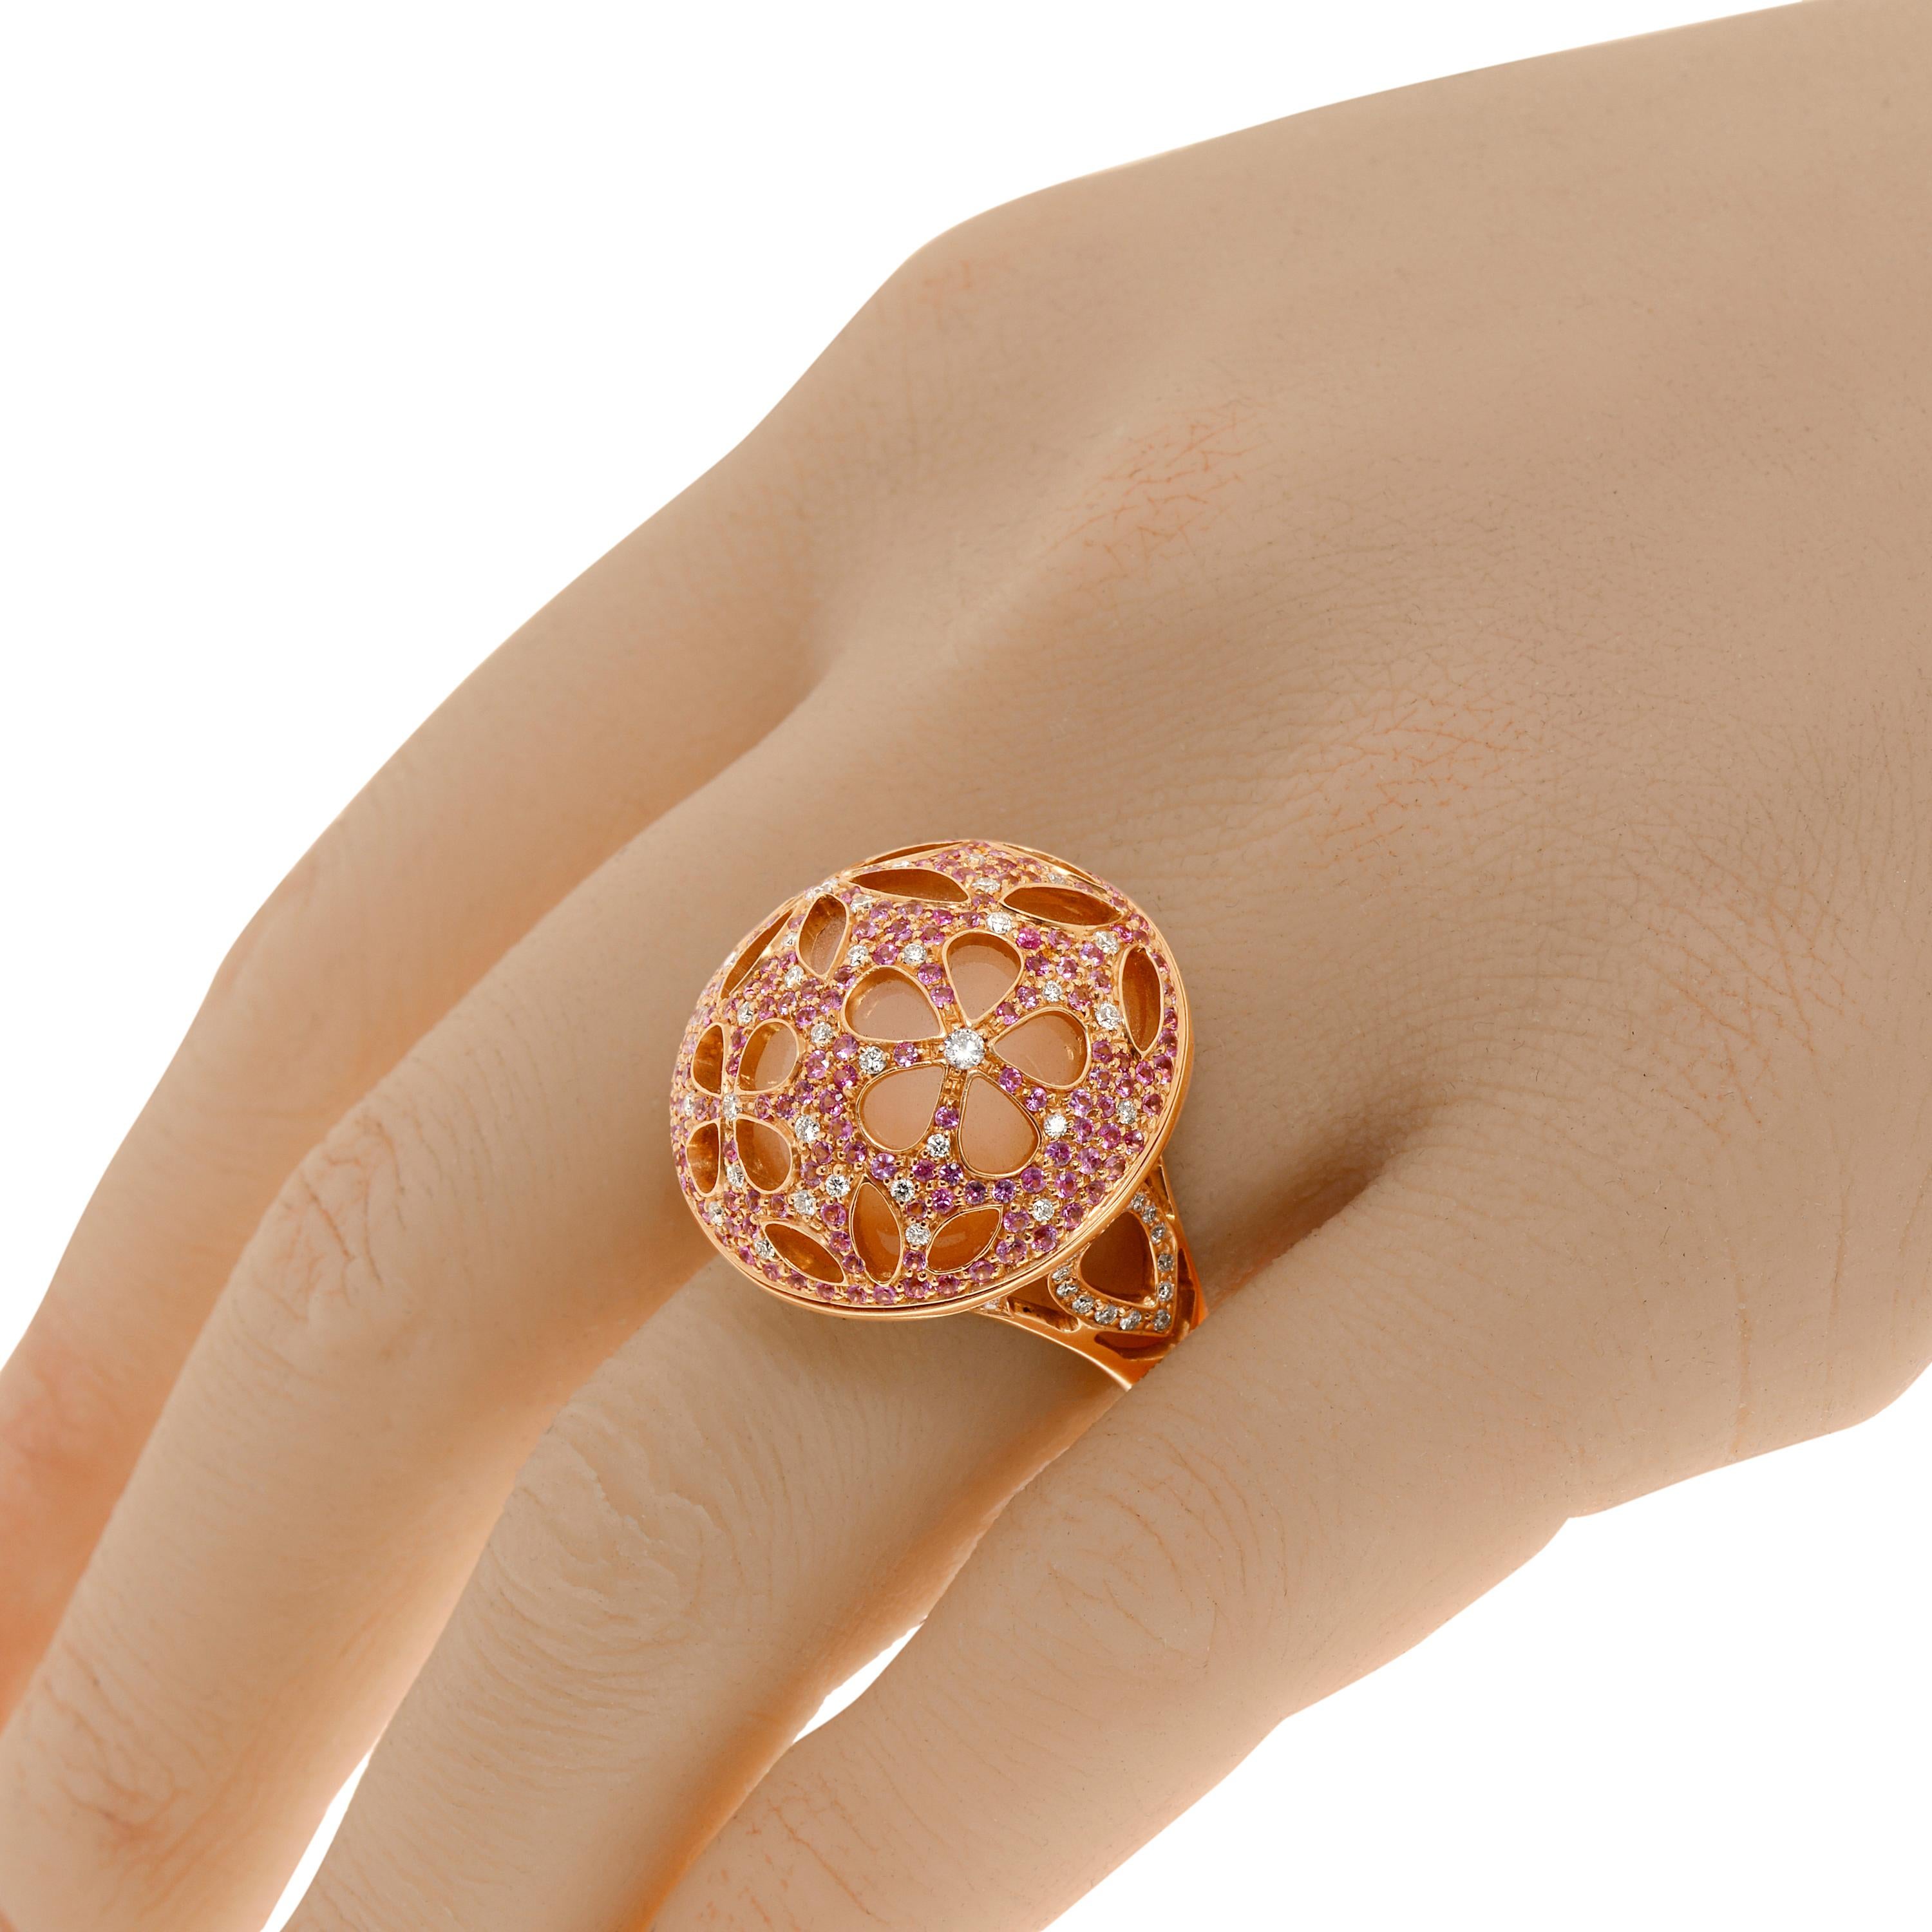 Zydo 18K rose gold statement ring features 0.62ct. tw. diamonds with flower cutouts to reveal a 1.31ct. tw. pink sapphire gem. The ring size is 6 (51.9). The decoration size is 1